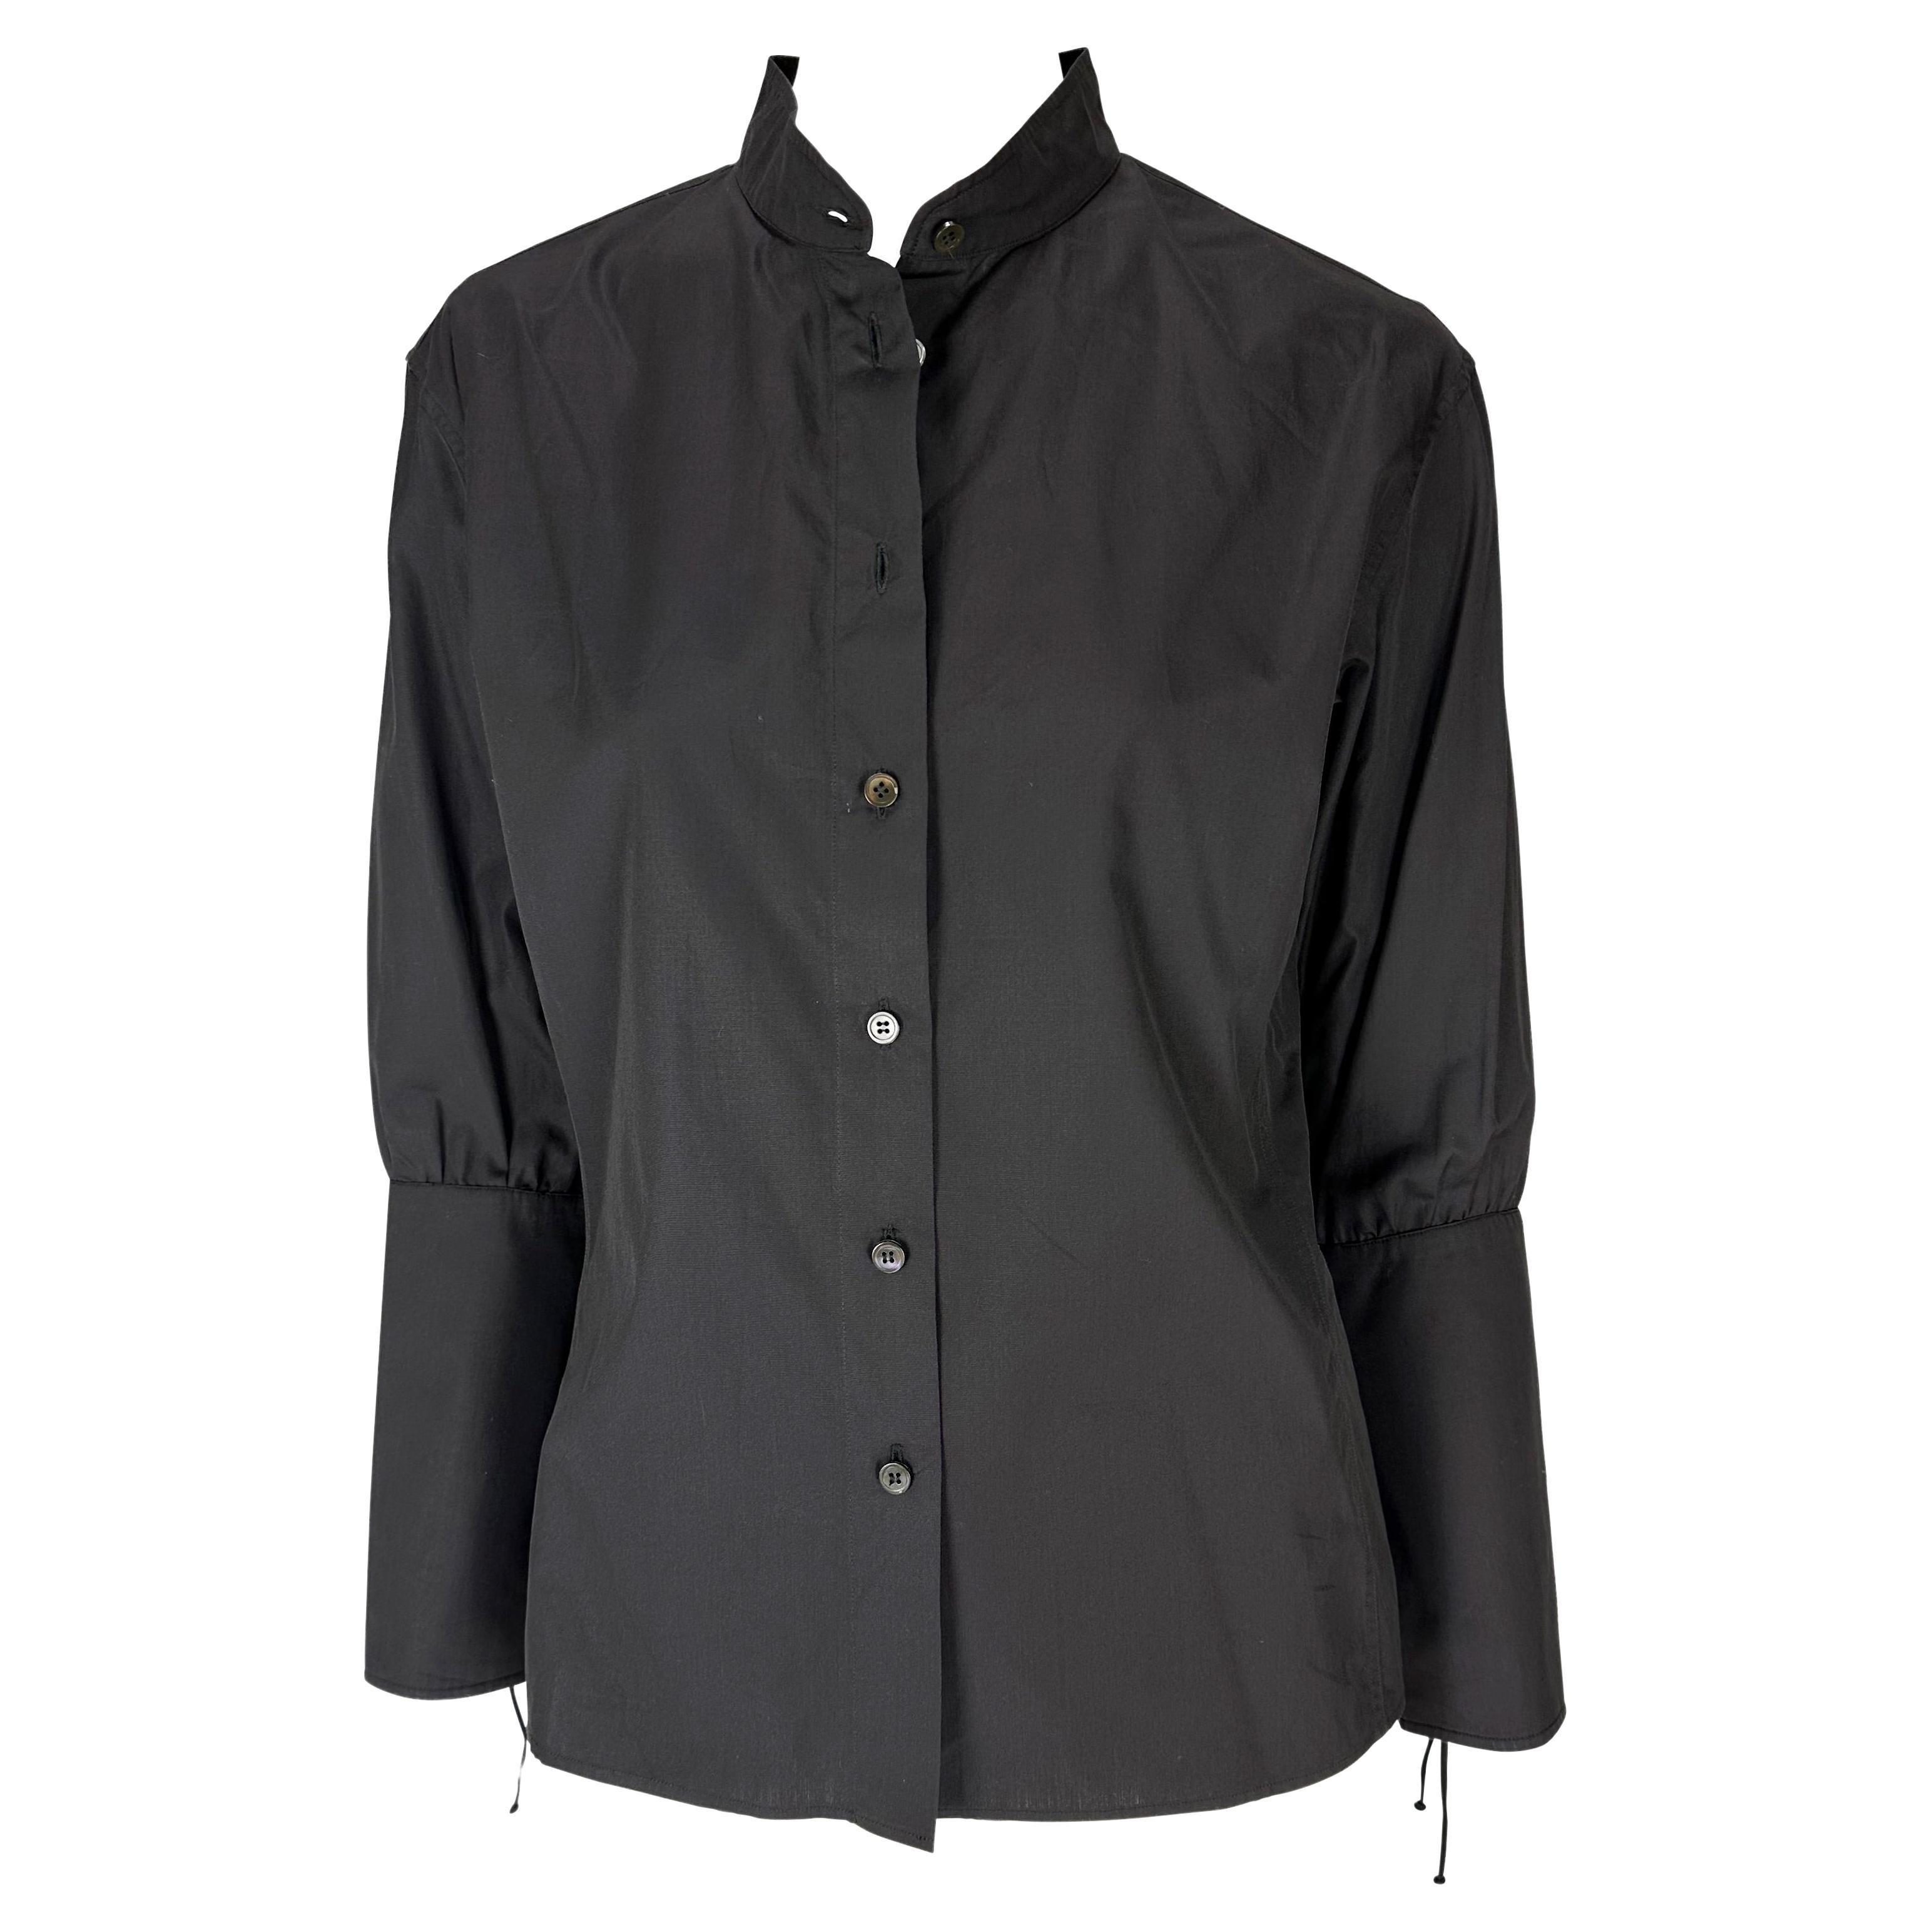 F/W 2001 Yves Saint Laurent by Tom Ford Lace-Up Cuff Black Button-Up Blouse For Sale 4